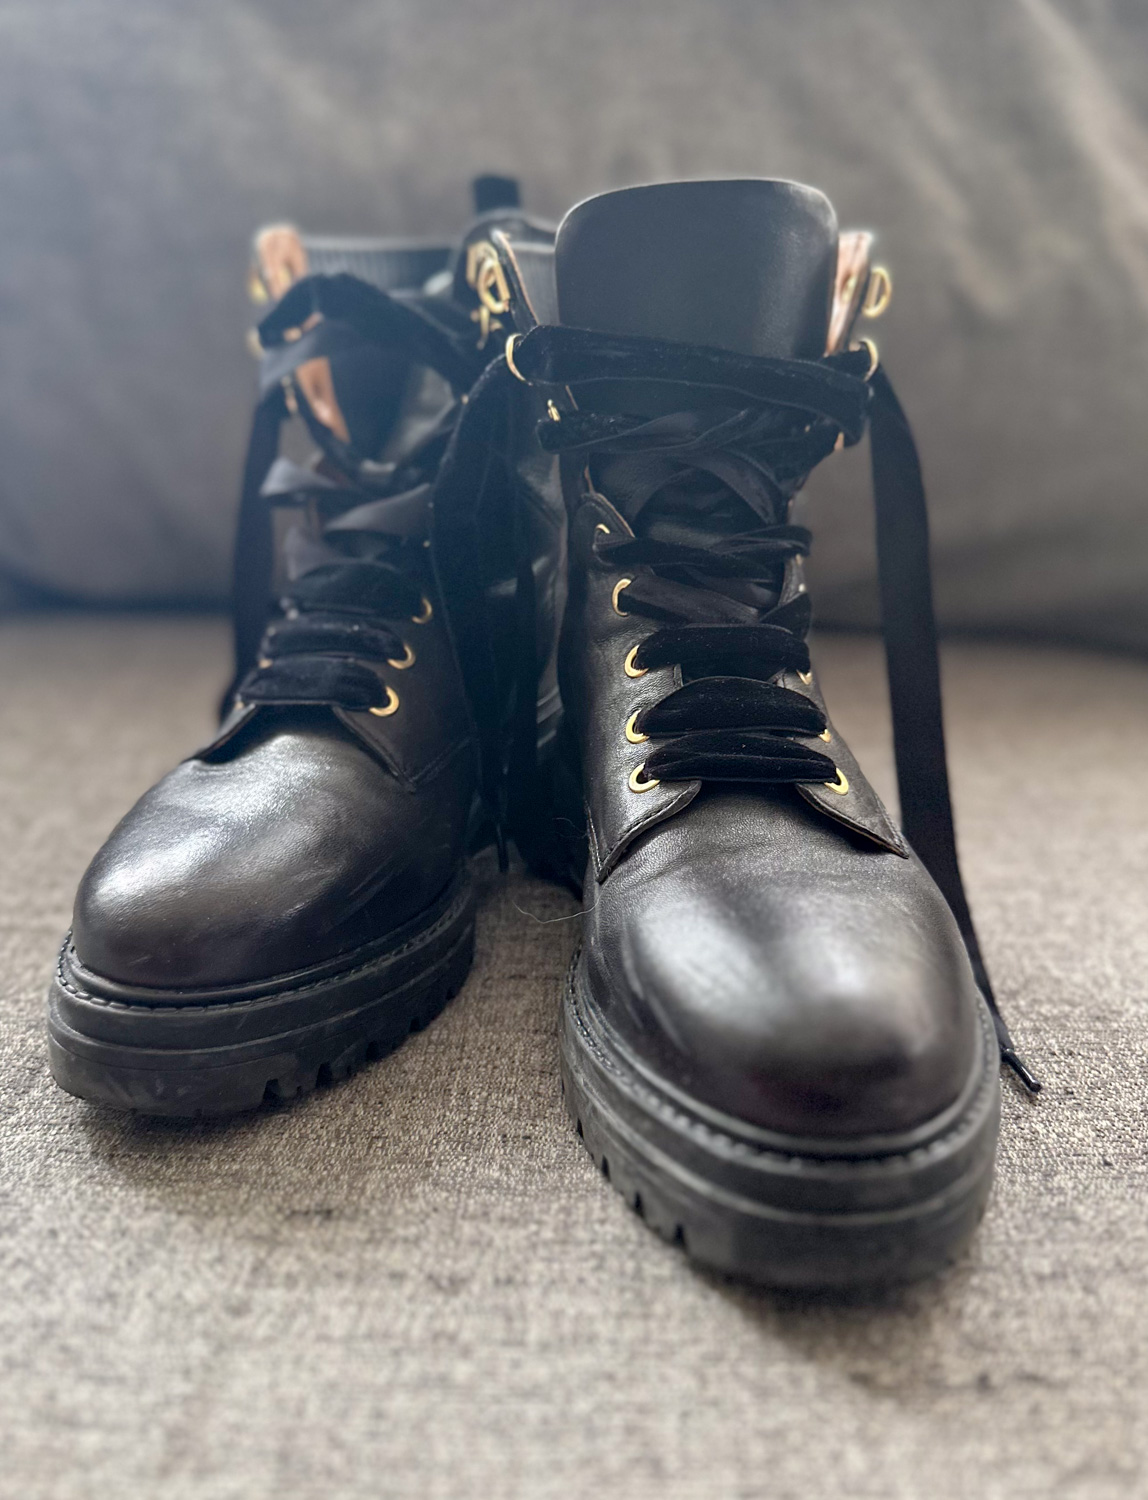 Sezane Niels Ankle Boots Review